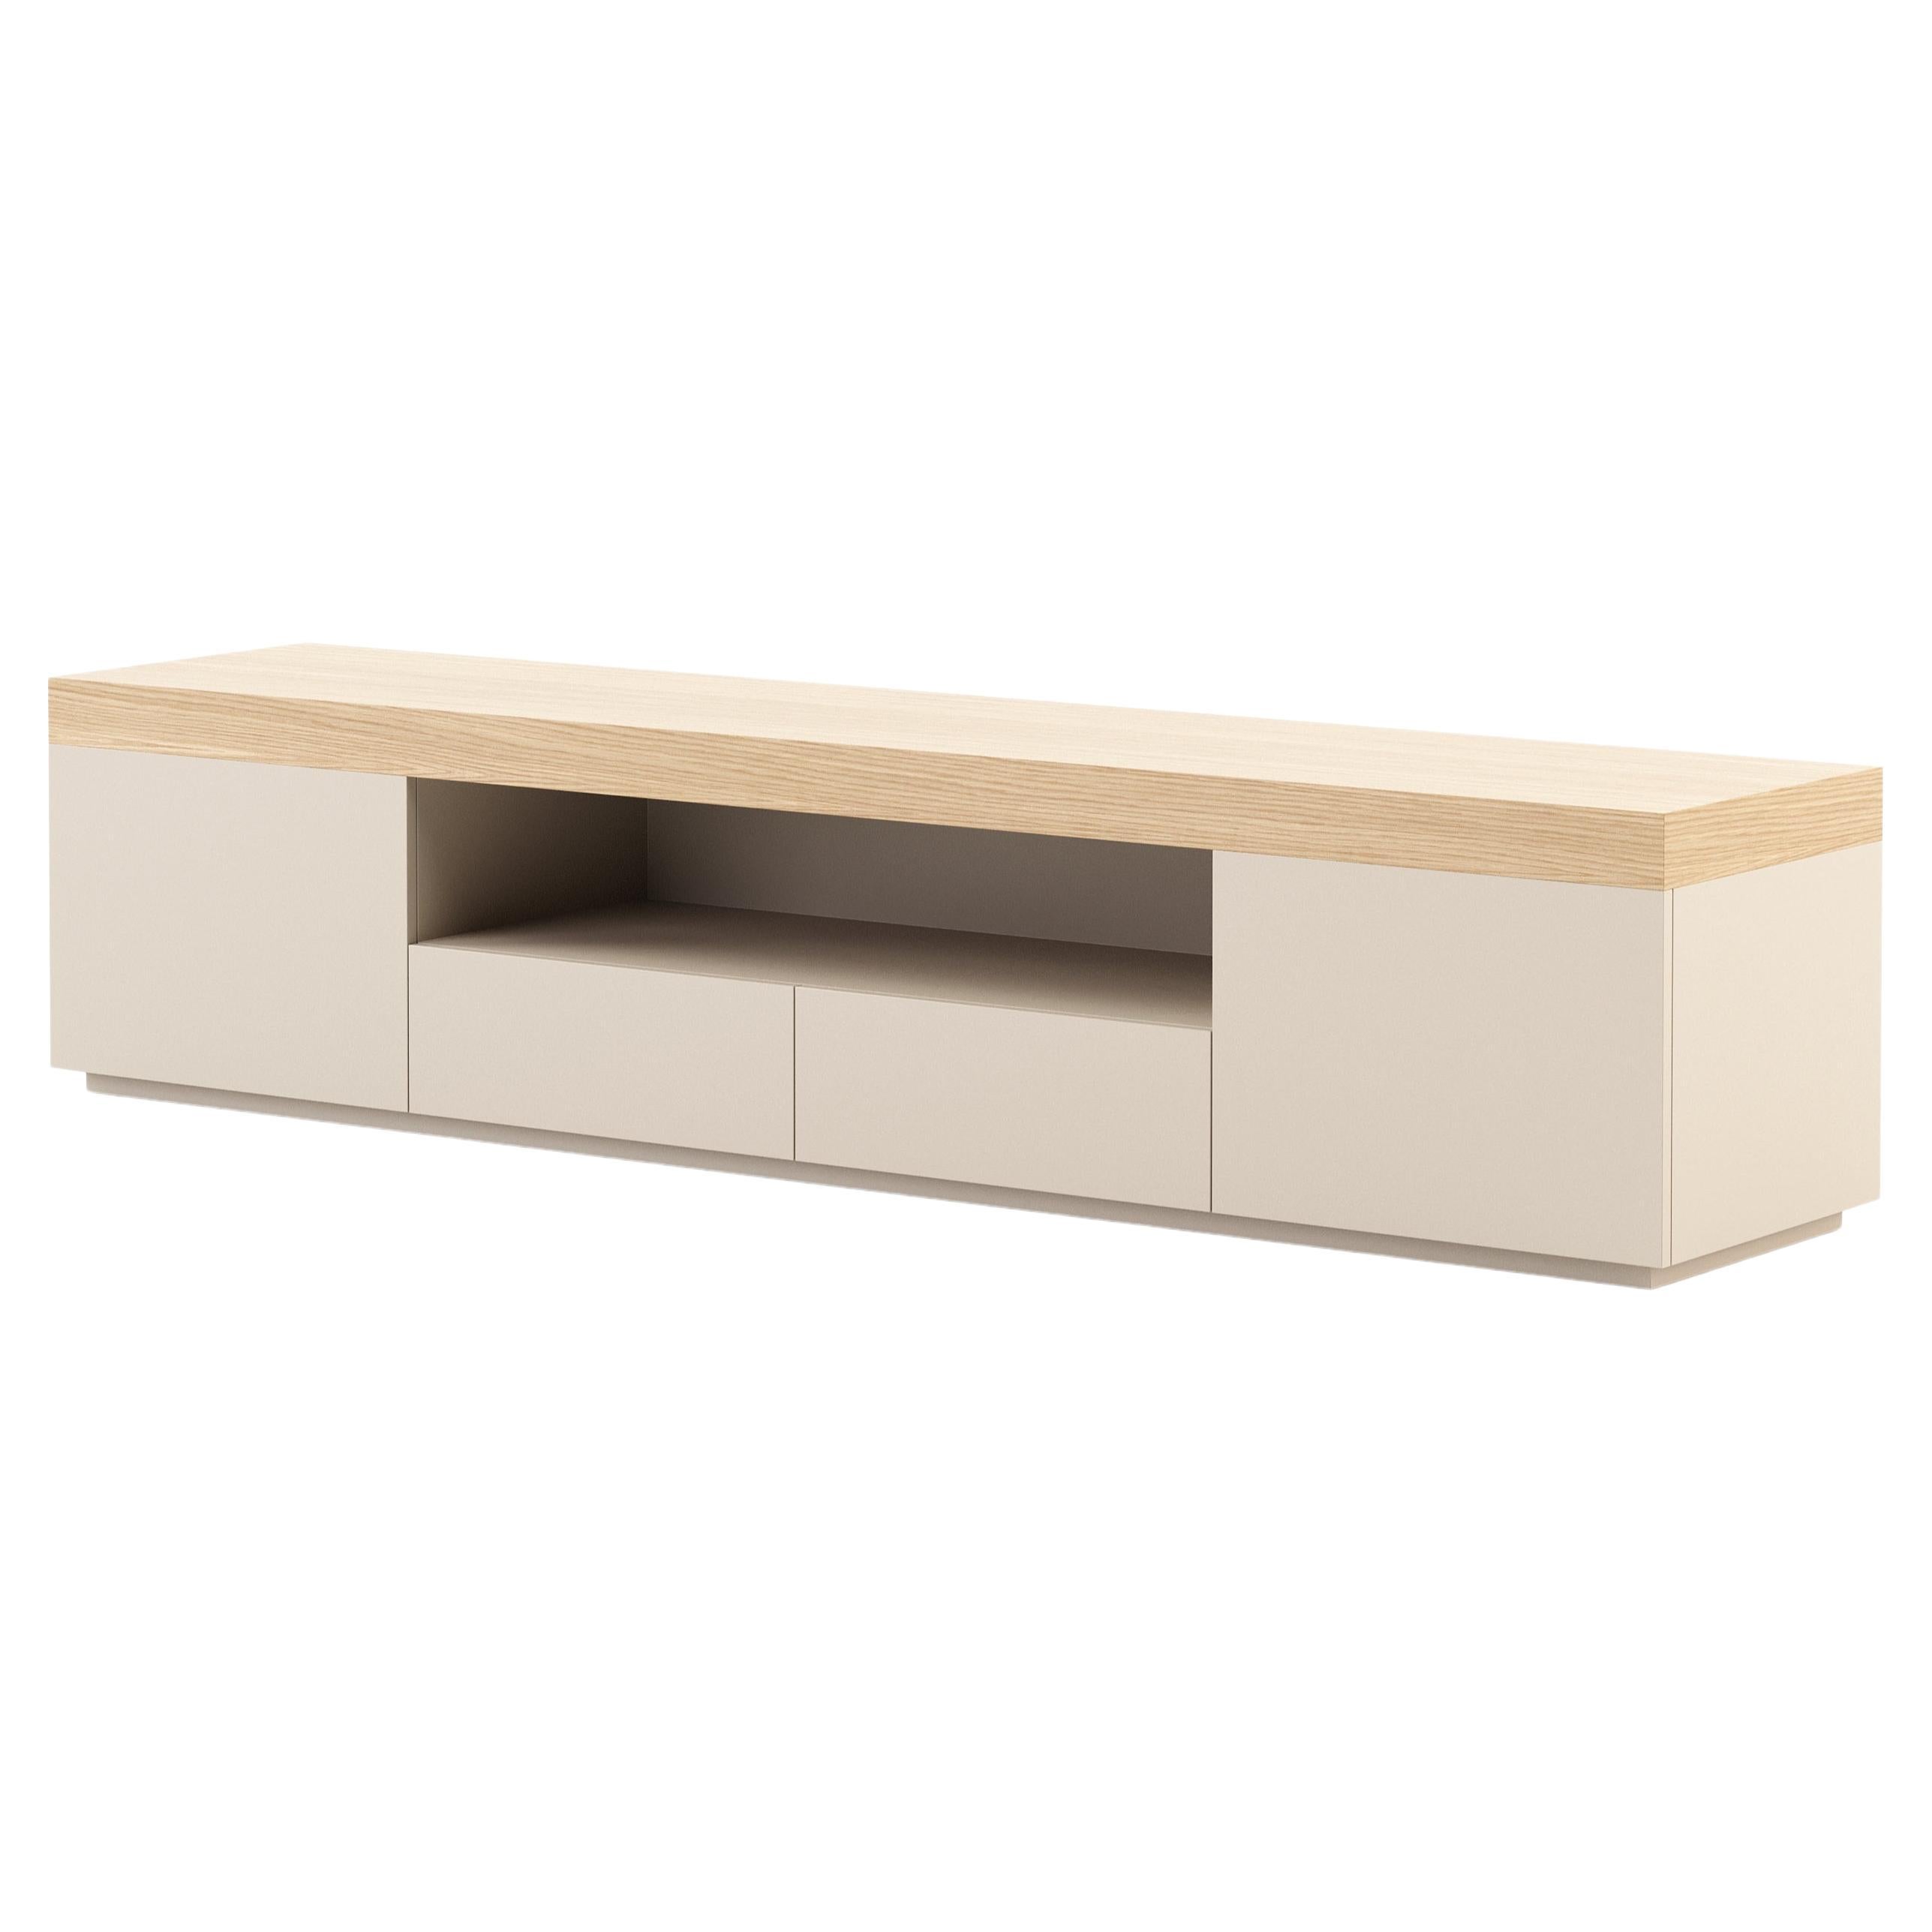 Modern Cascais Tv Cabinet made with Oak and lacquer, Handmade by Stylish Club For Sale